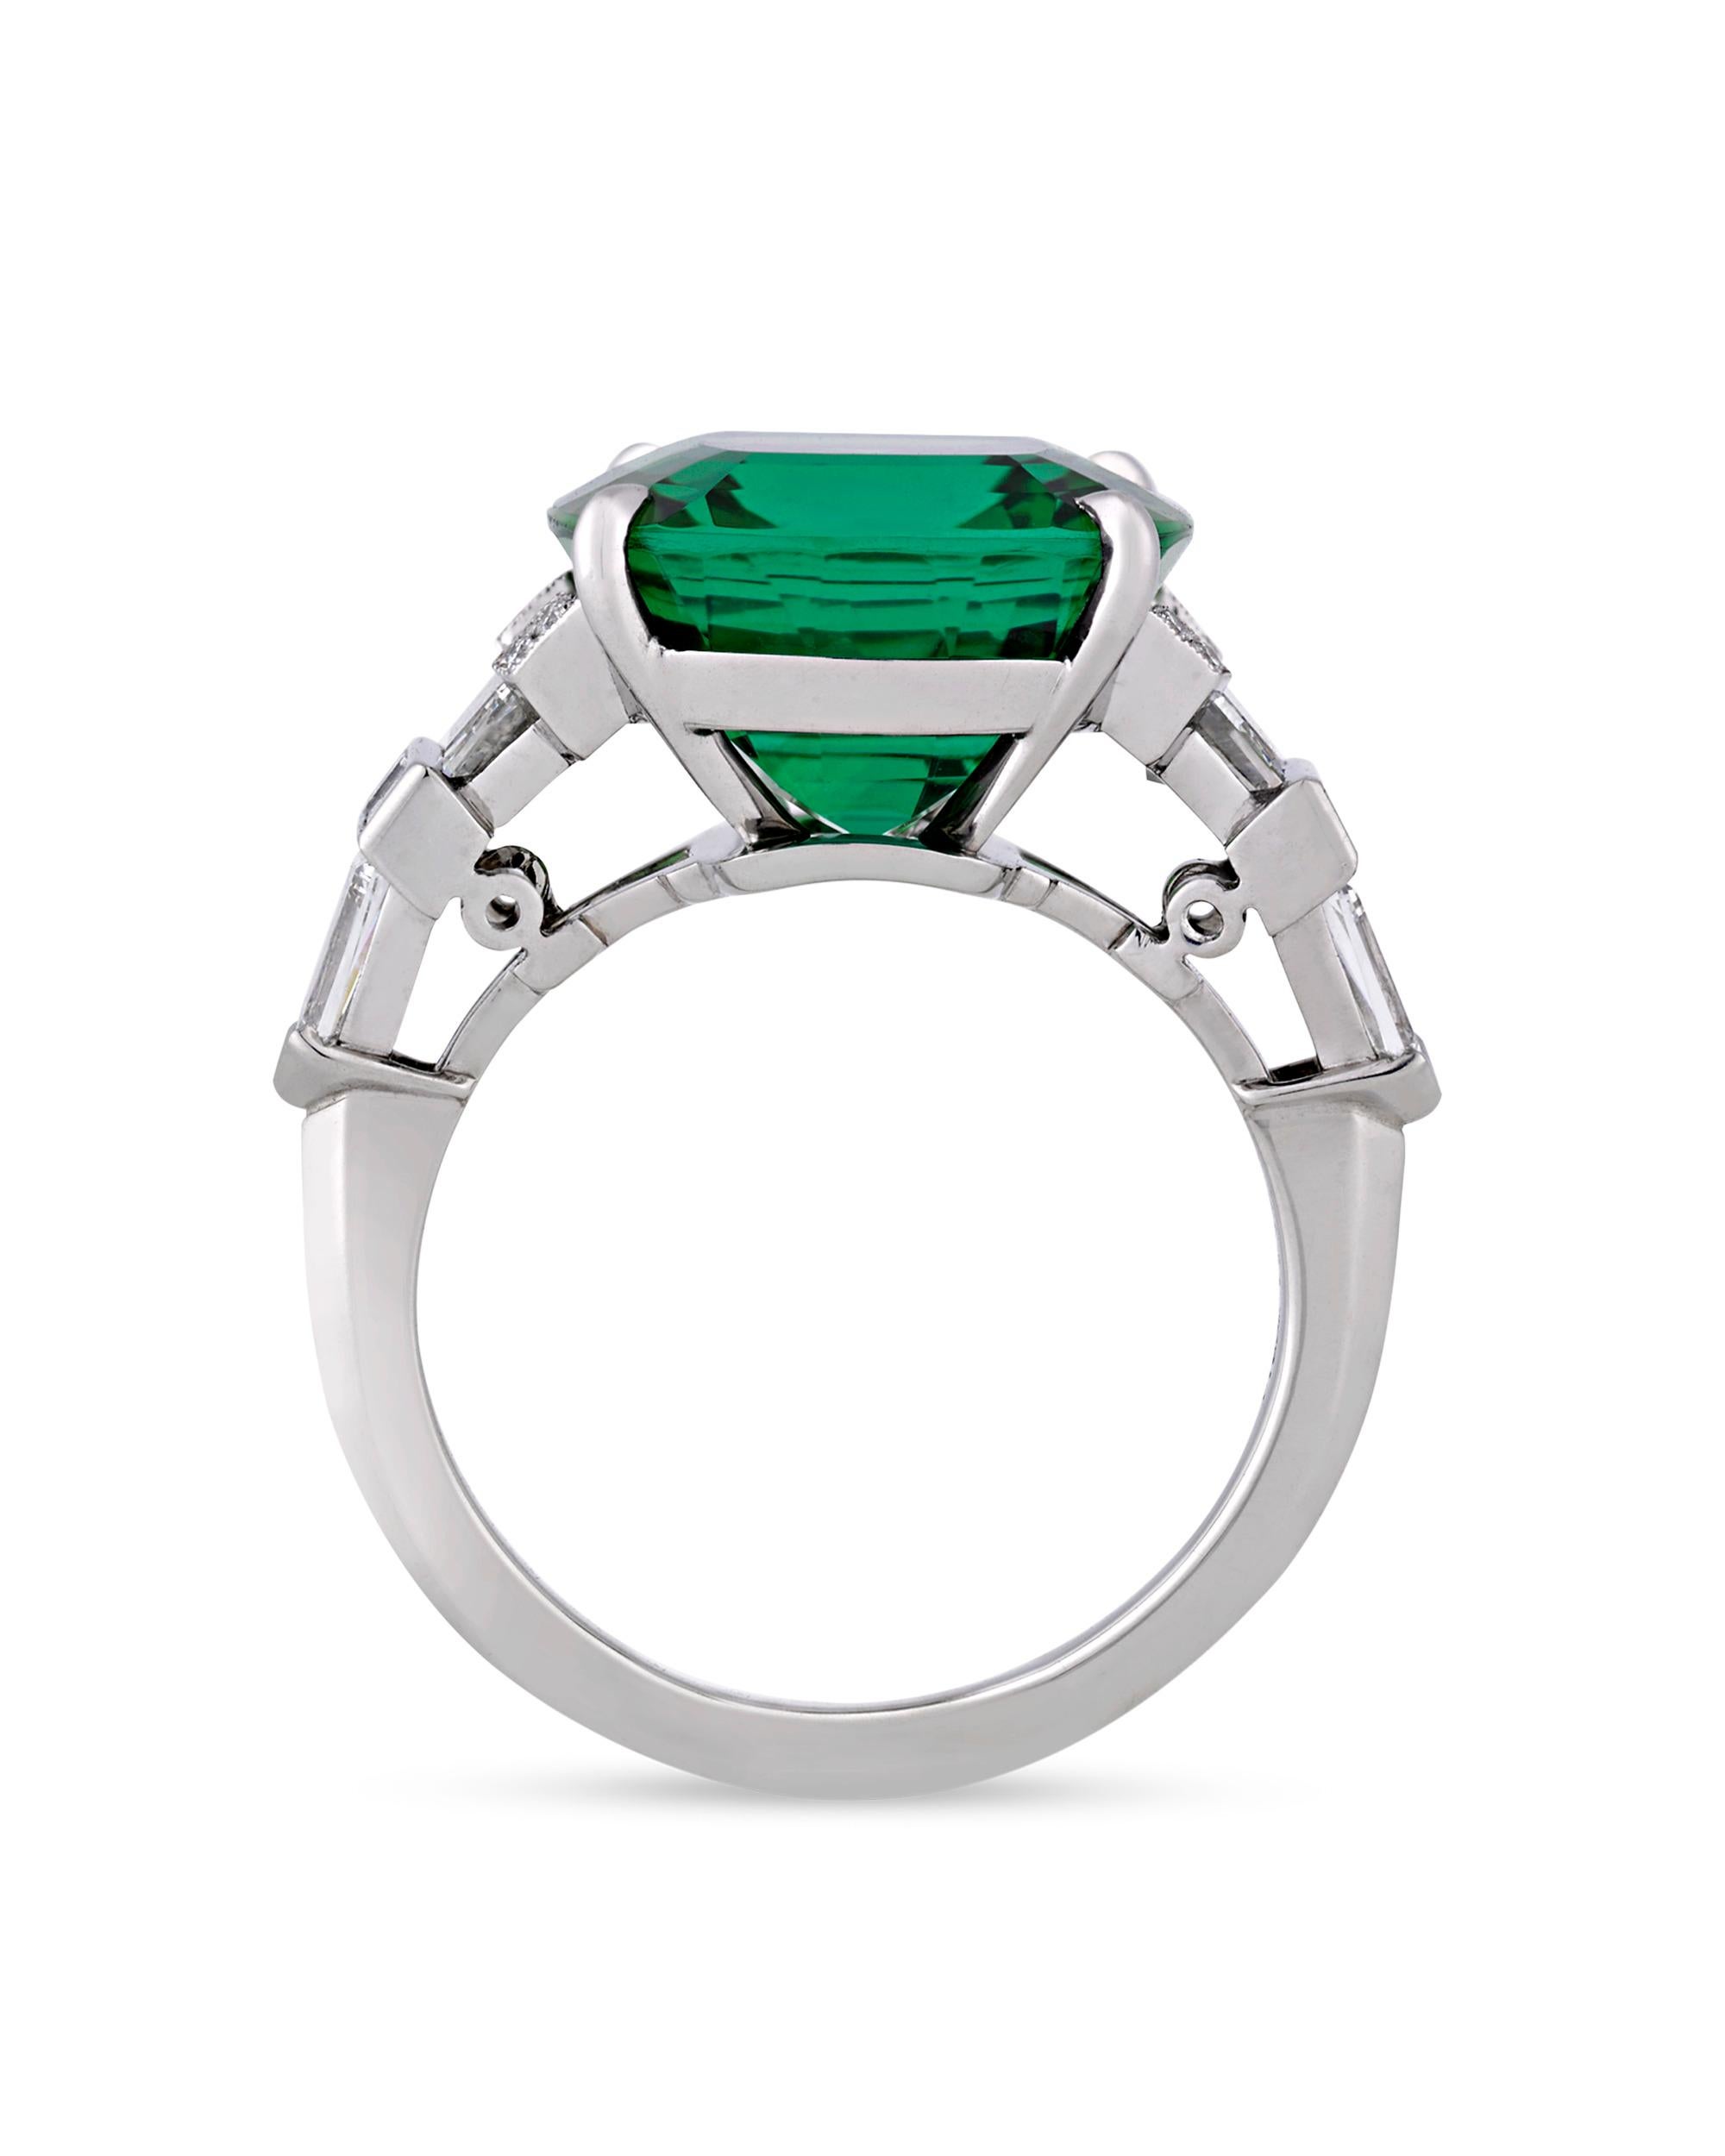 This captivating green tourmaline and diamond ring was crafted by American jeweler and designer Raymond Yard. Absolutely brilliant with an attractive and incredibly vibrant green hue, this stone represents the tourmaline at its very best, with a